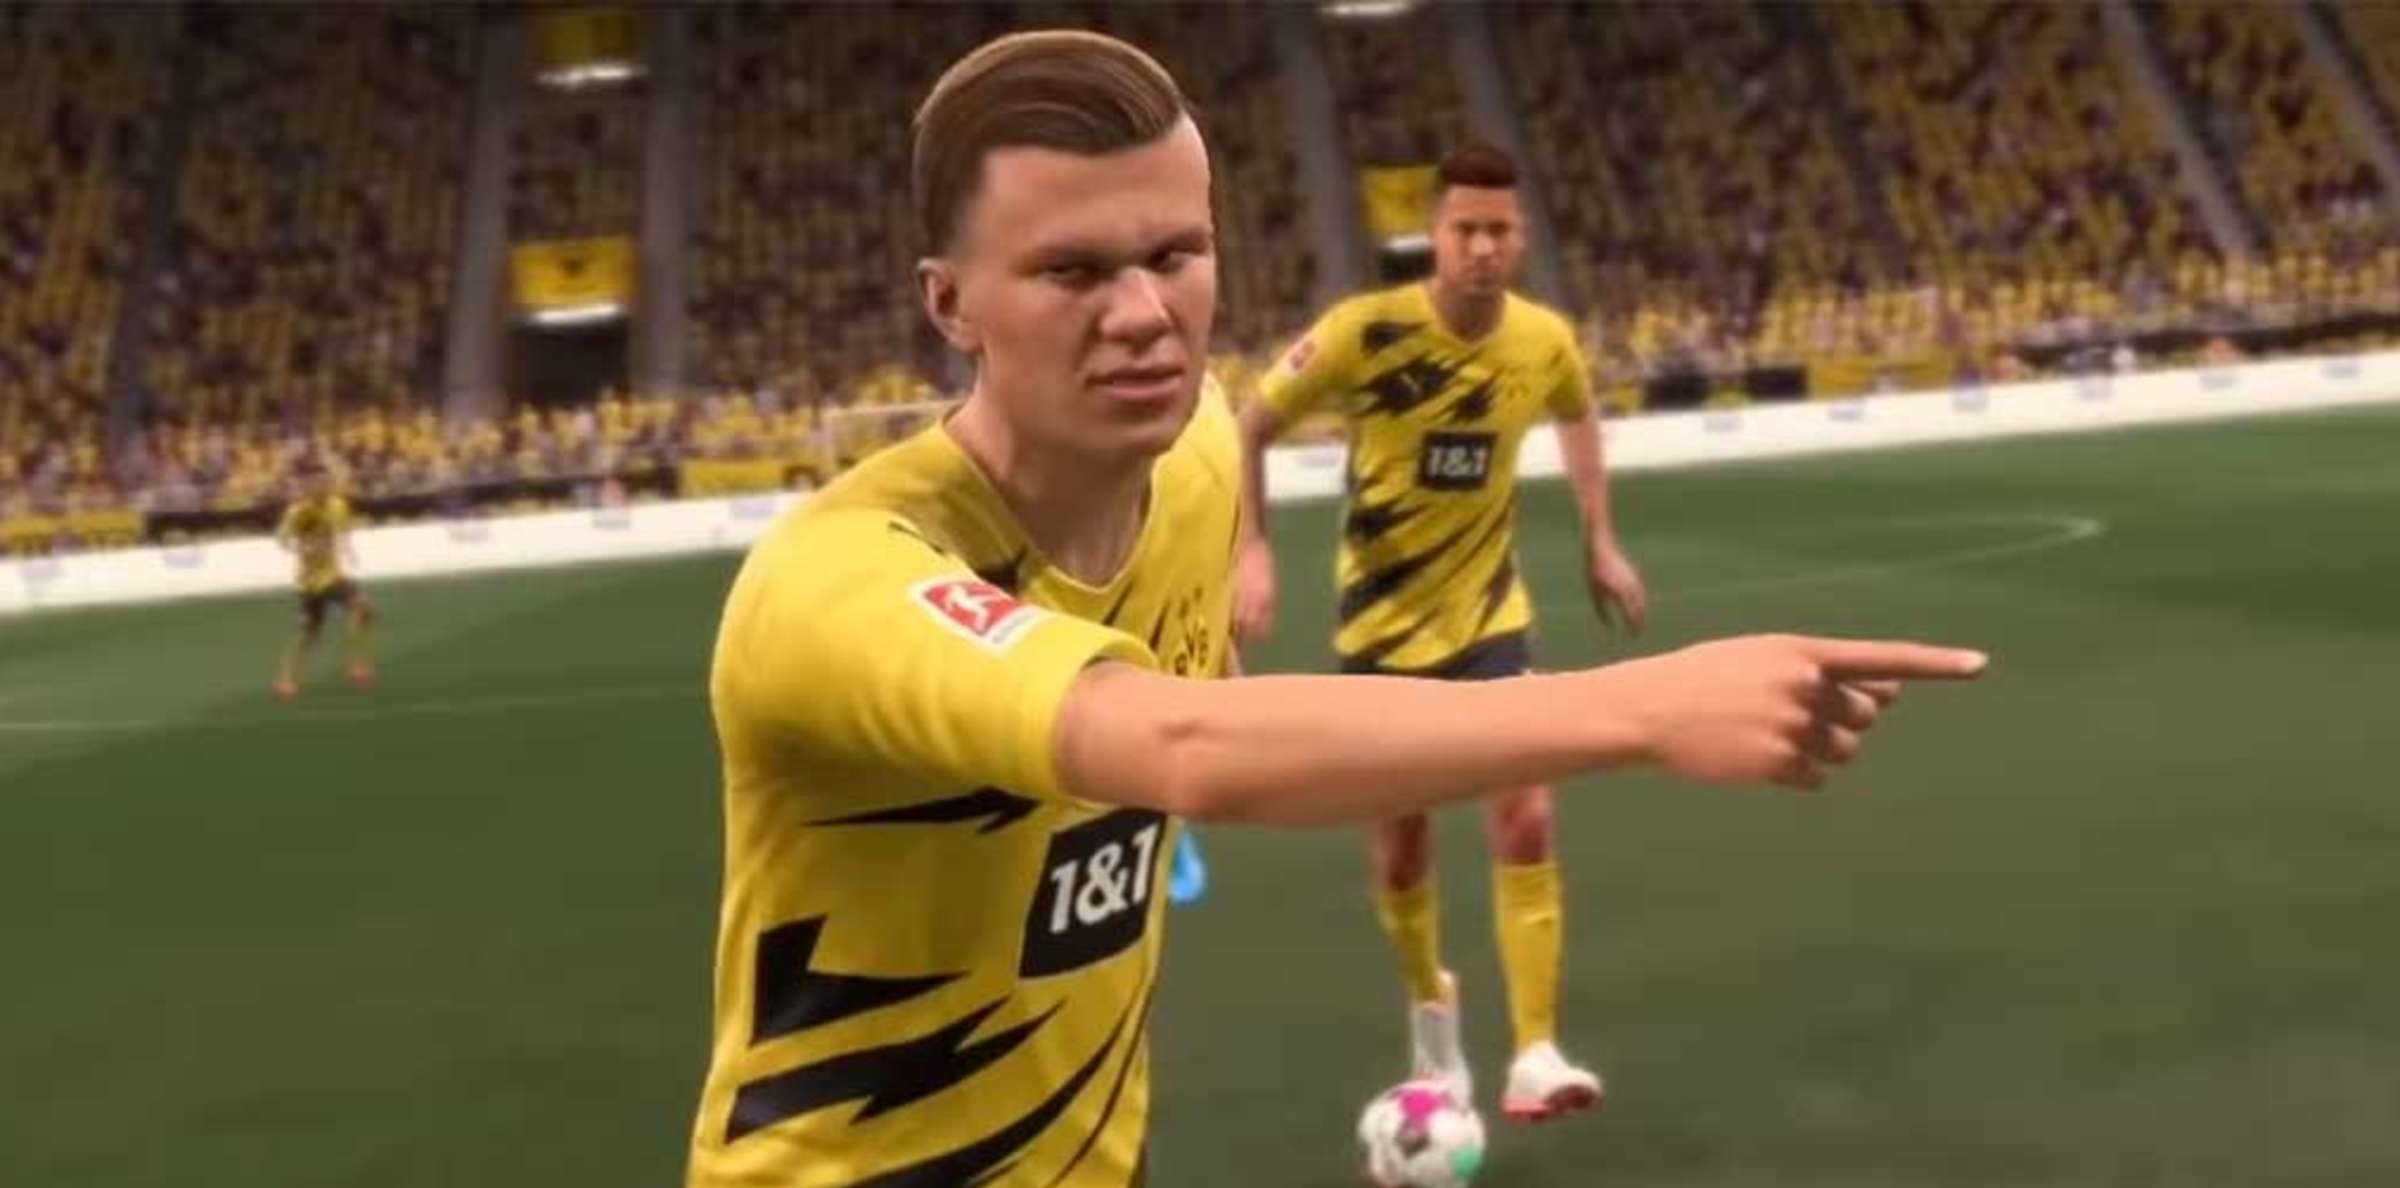 FIFA 21: Rage Quitting is actually good for the game!